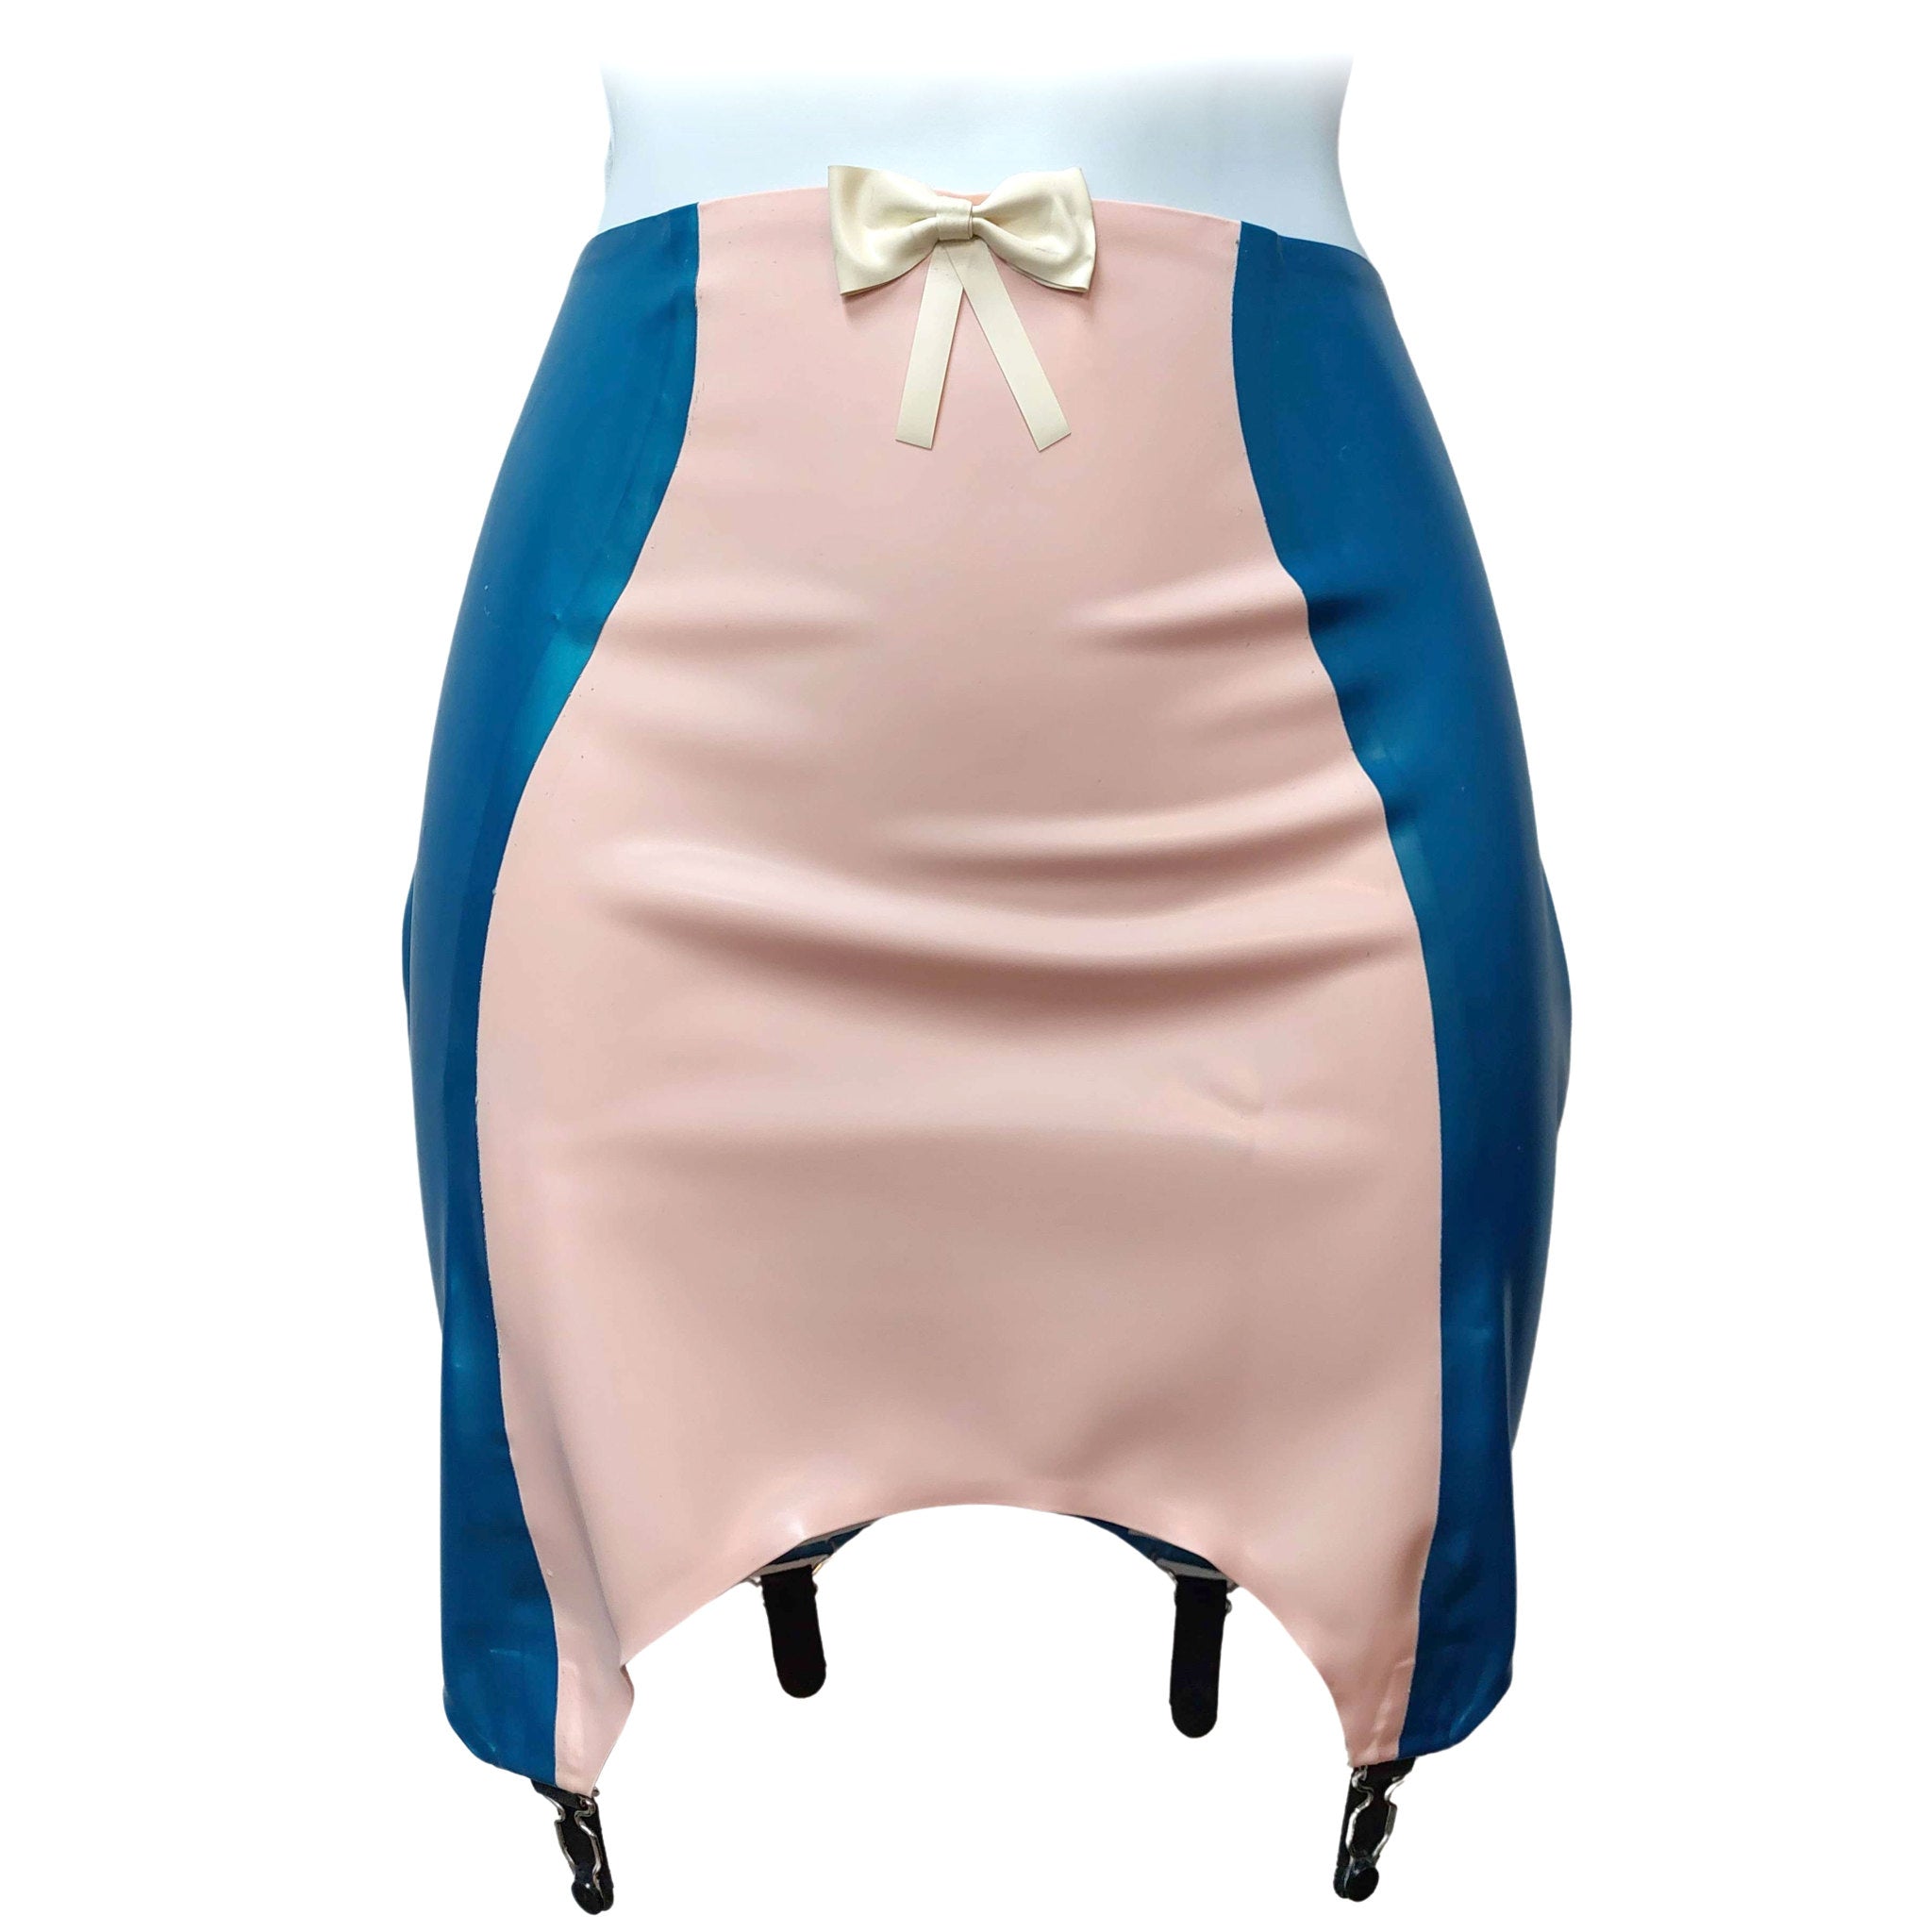 Latex Panel Garter Skirt With Bow Size S